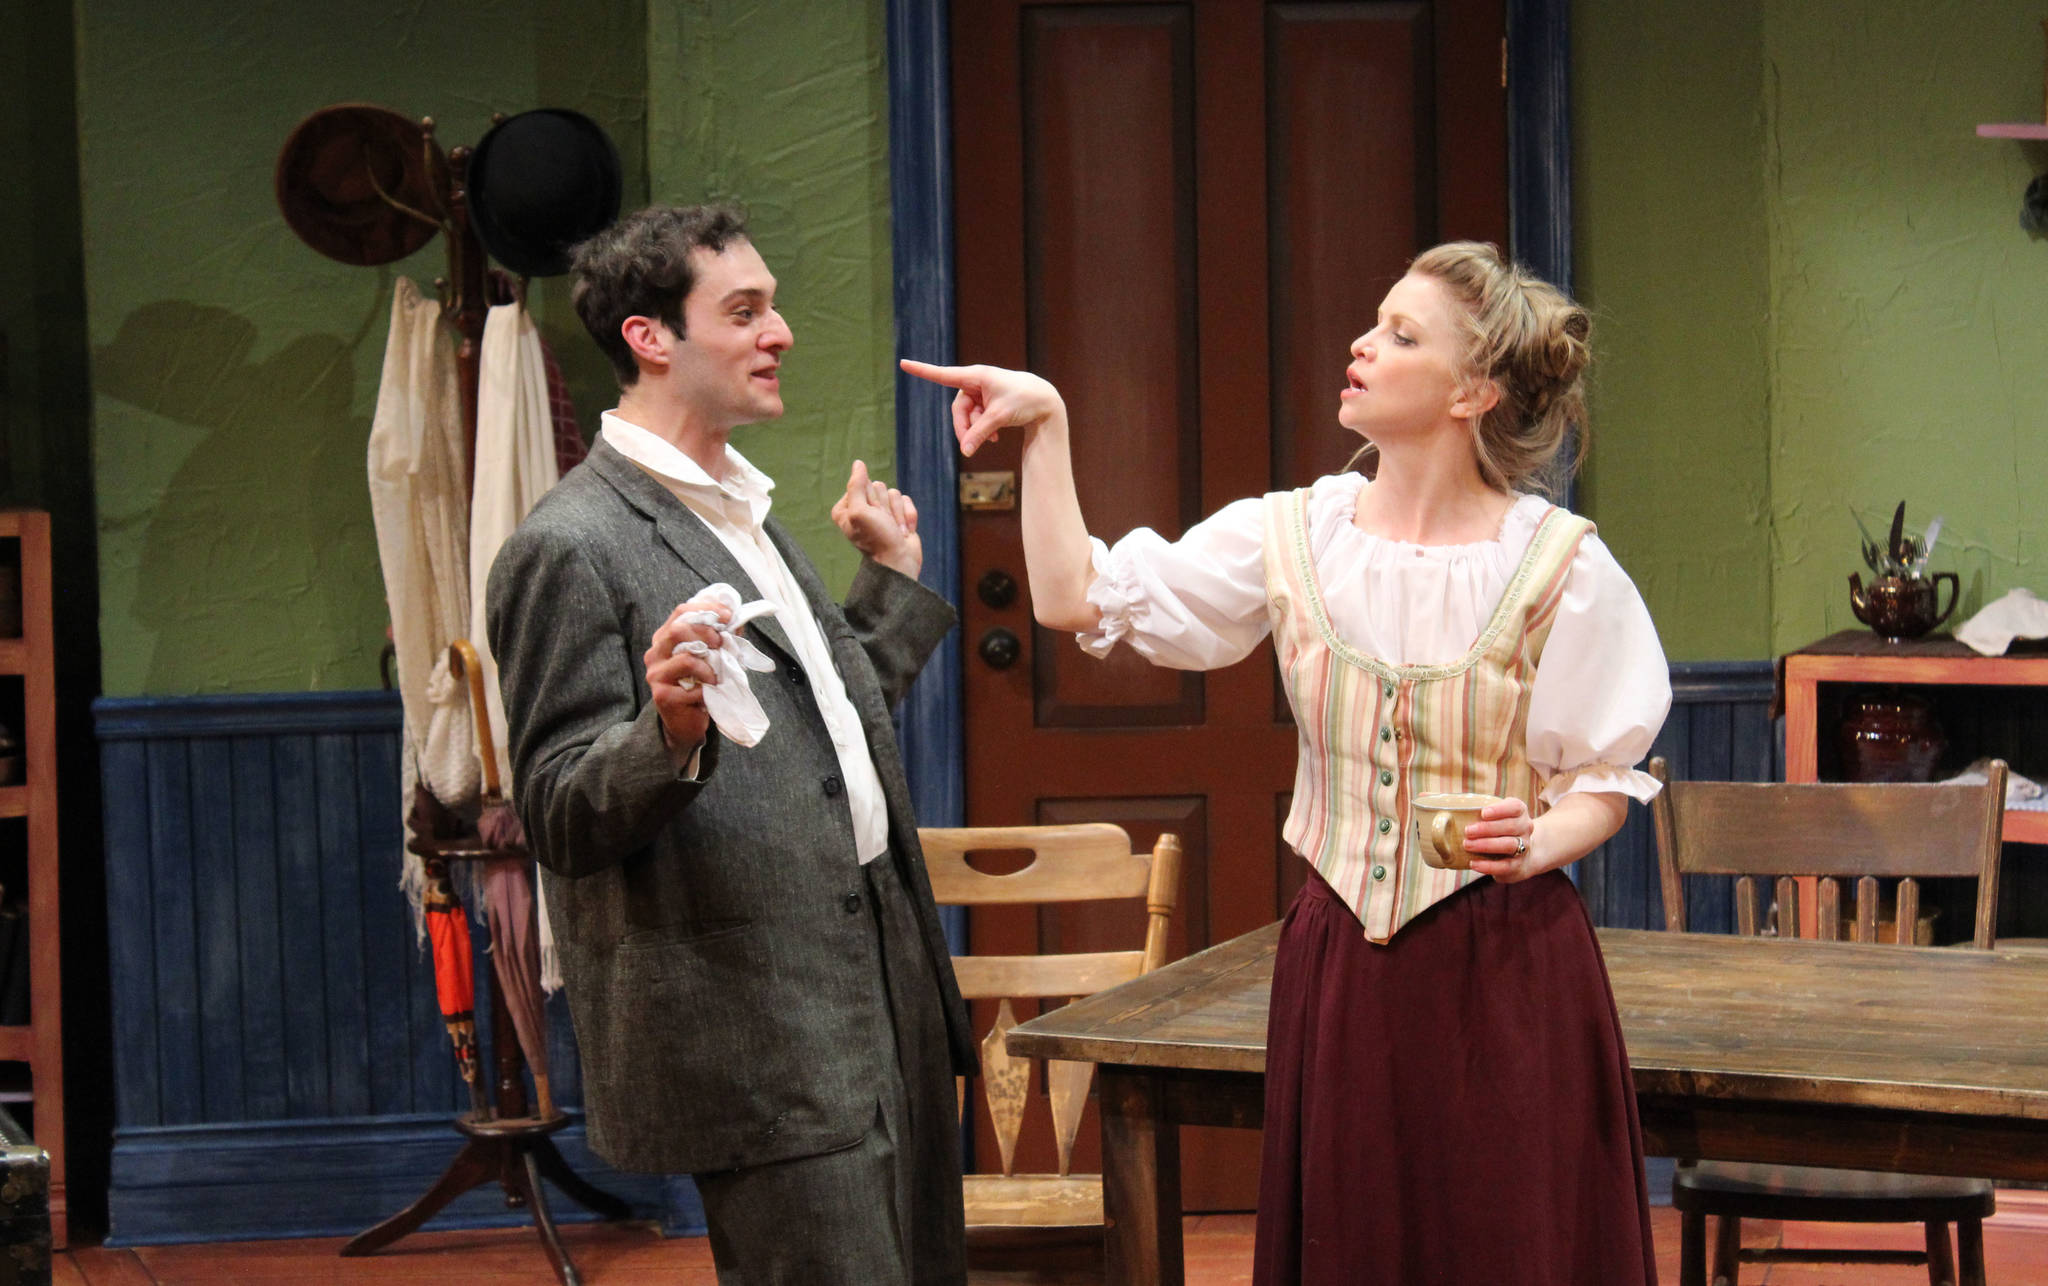 Benjamin Cohen (Evan Rothfeld) recoils from the object of his affection, Louise, during a heated exchange. Cohen wishes to rent a room from Louise after catching a glimpse of her underpants. (Courtesy Photo | Perseverance Theatre)